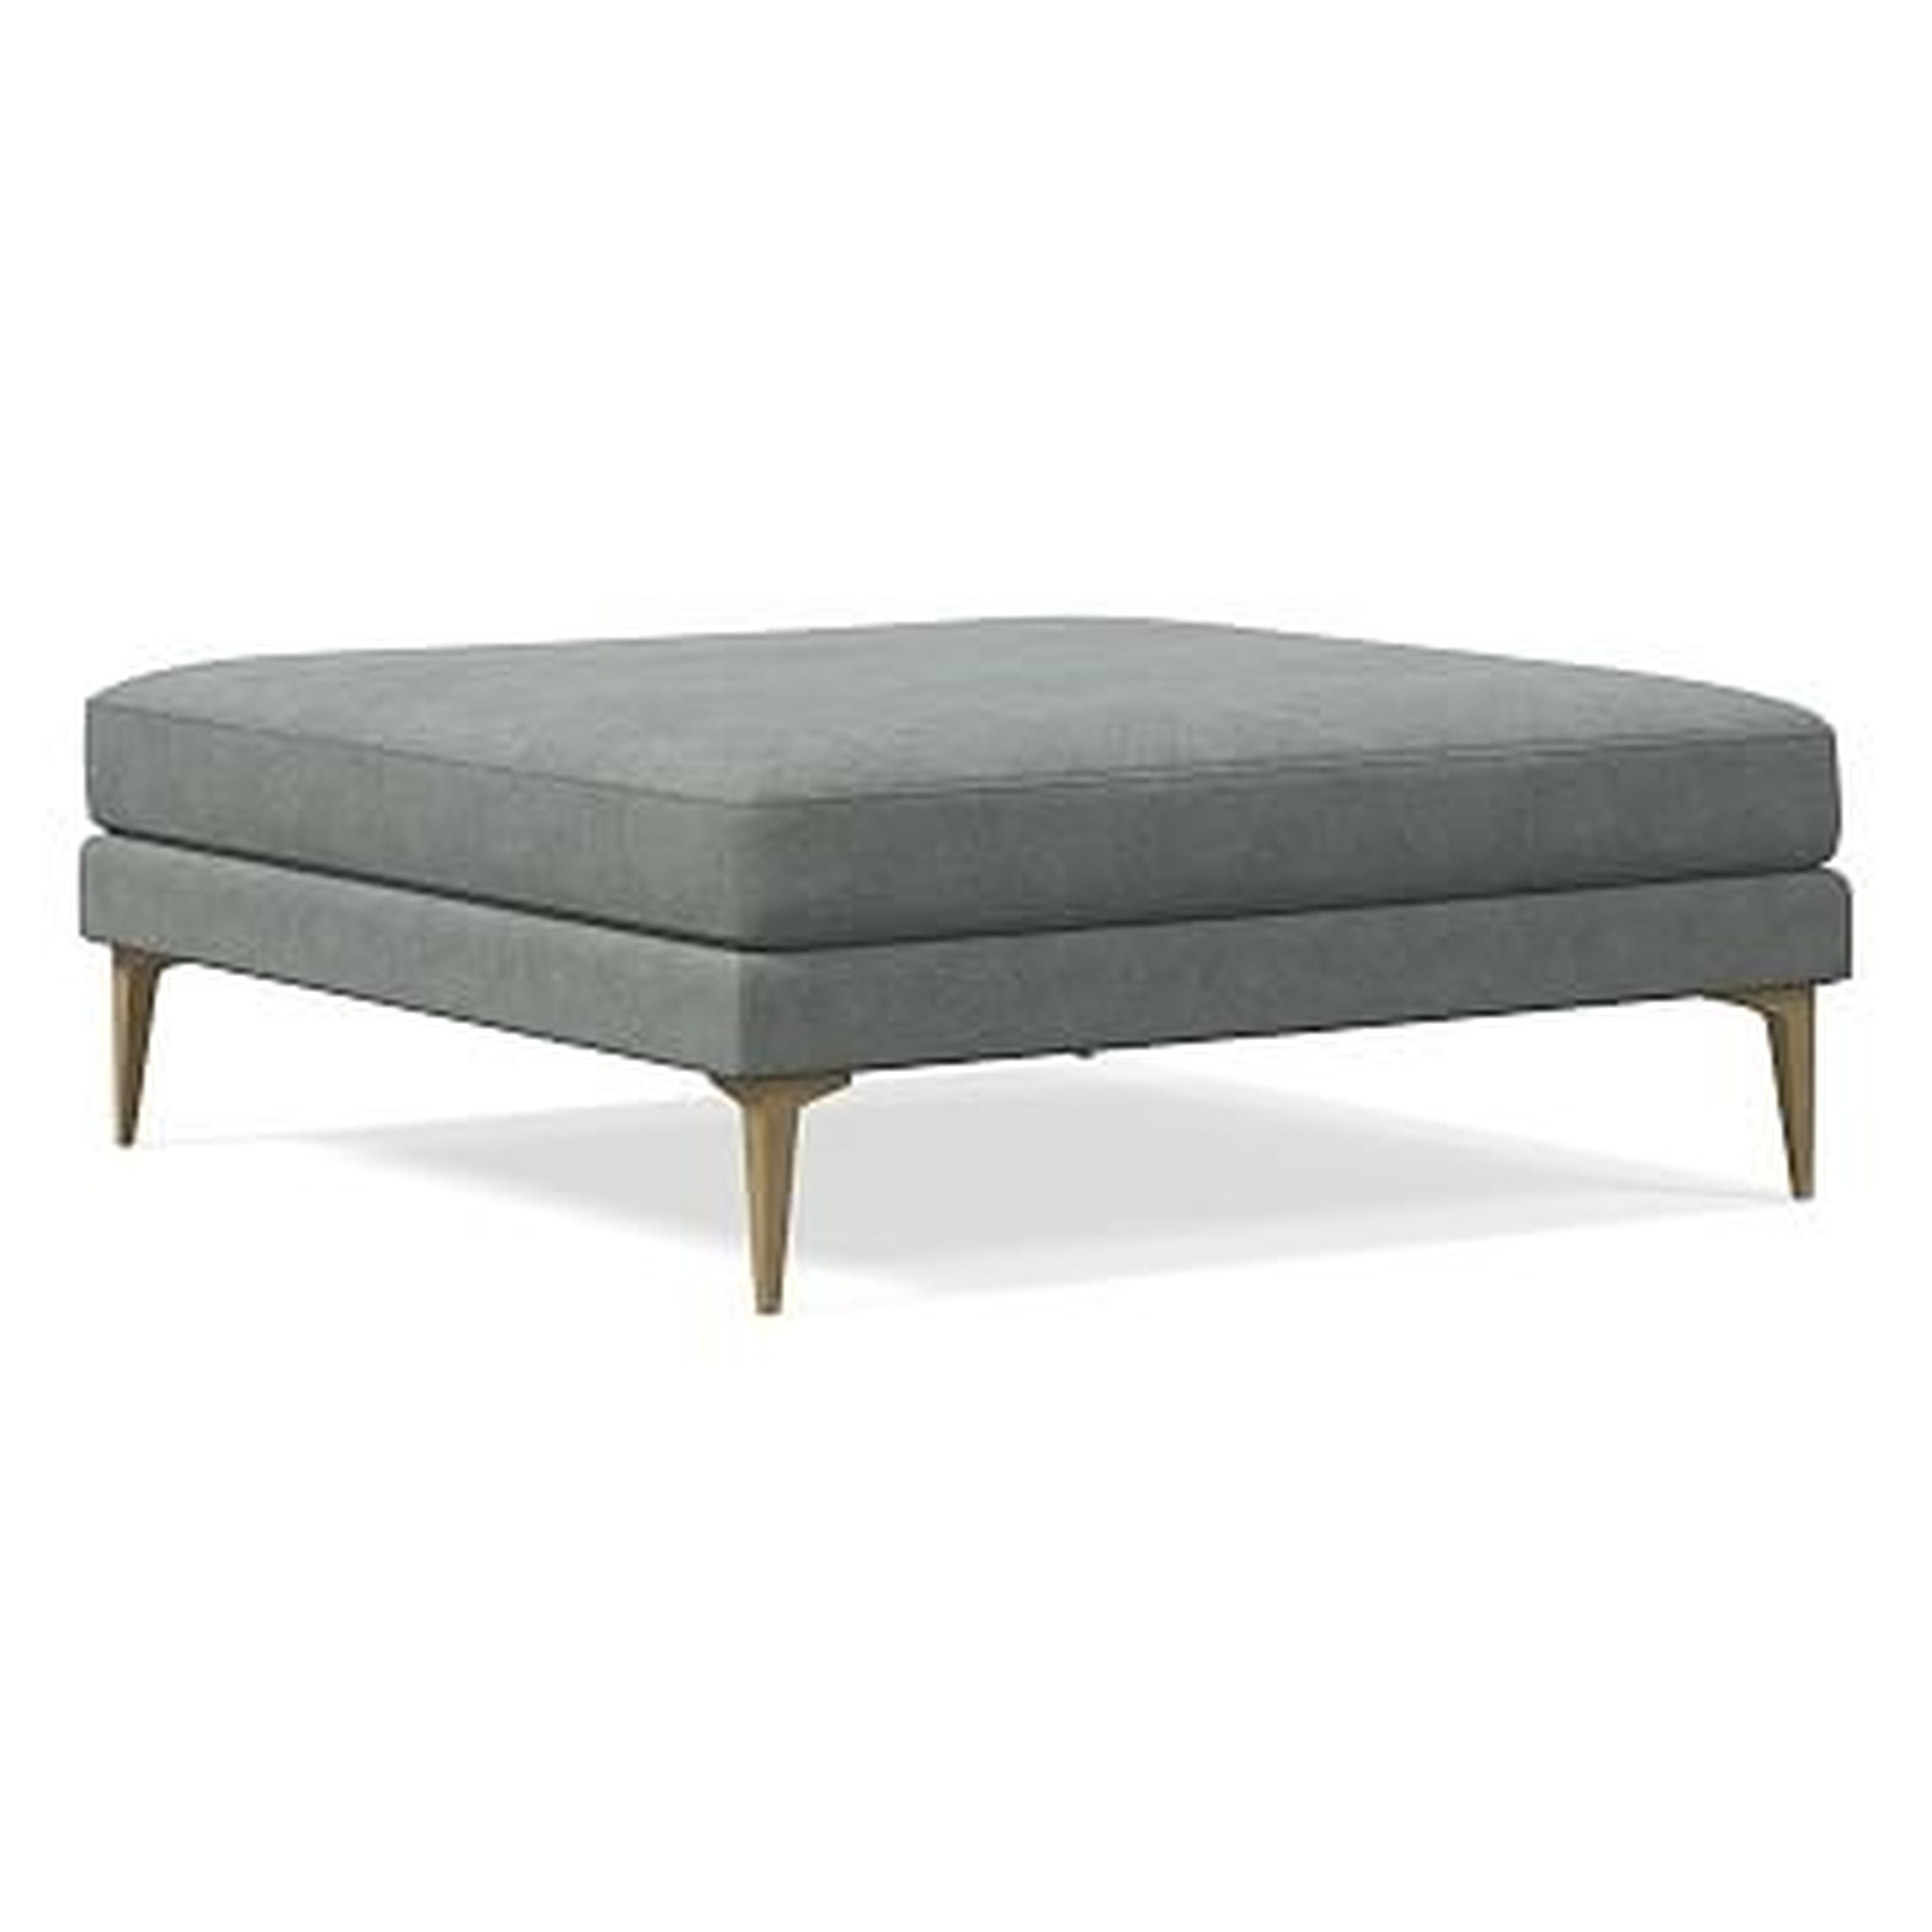 Andes XL Ottoman, Distressed Velvet, Mineral Gray, Blackened Brass - West Elm